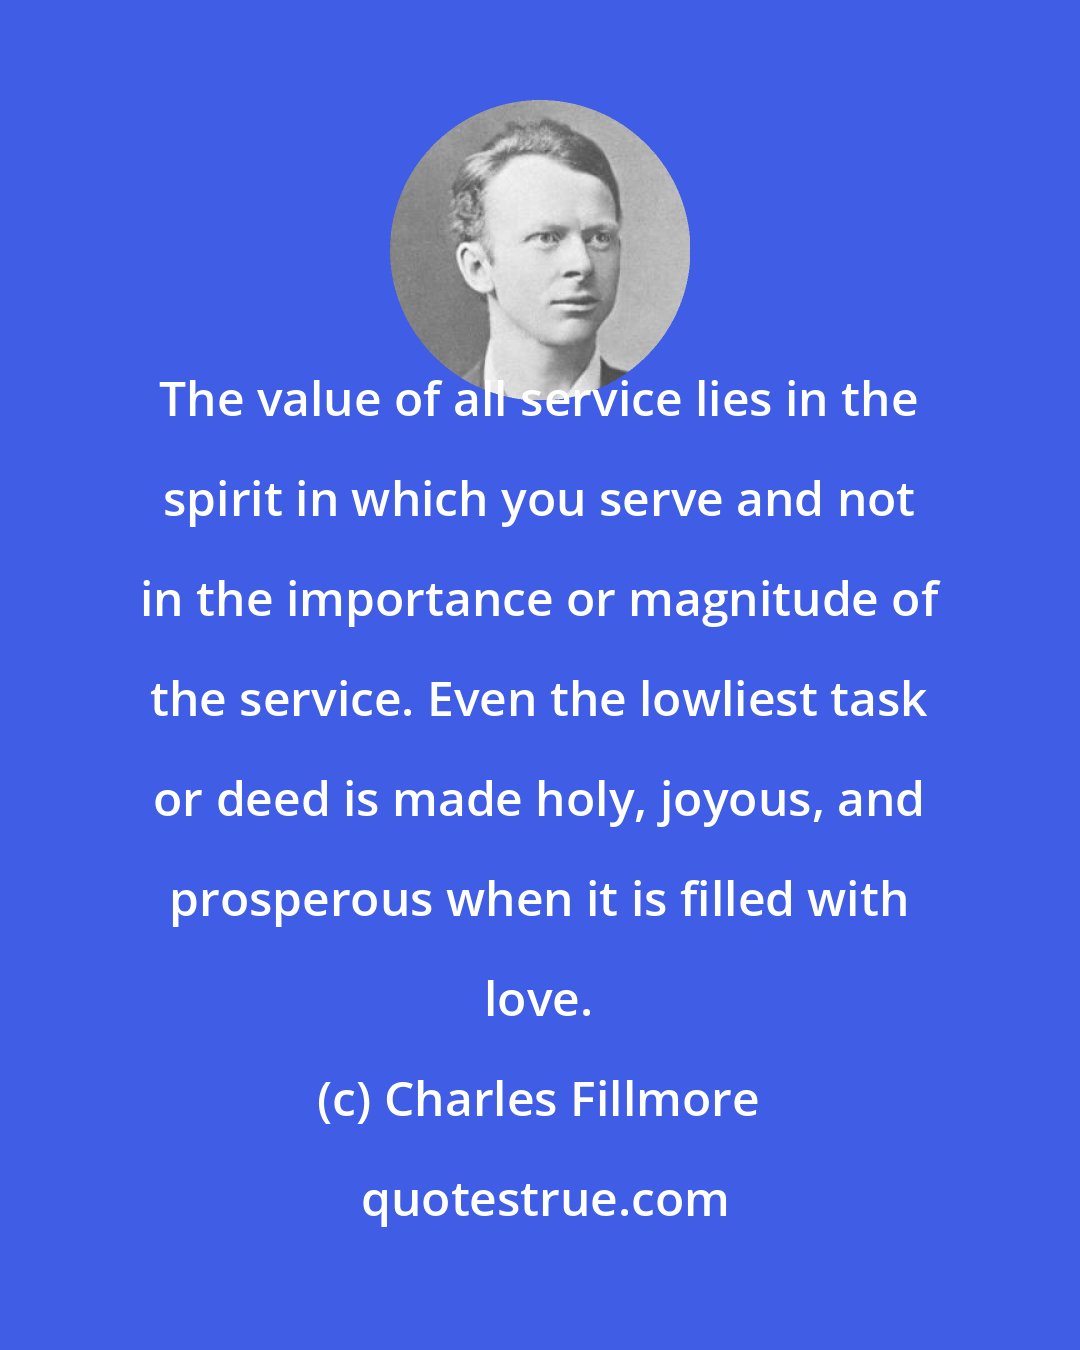 Charles Fillmore: The value of all service lies in the spirit in which you serve and not in the importance or magnitude of the service. Even the lowliest task or deed is made holy, joyous, and prosperous when it is filled with love.